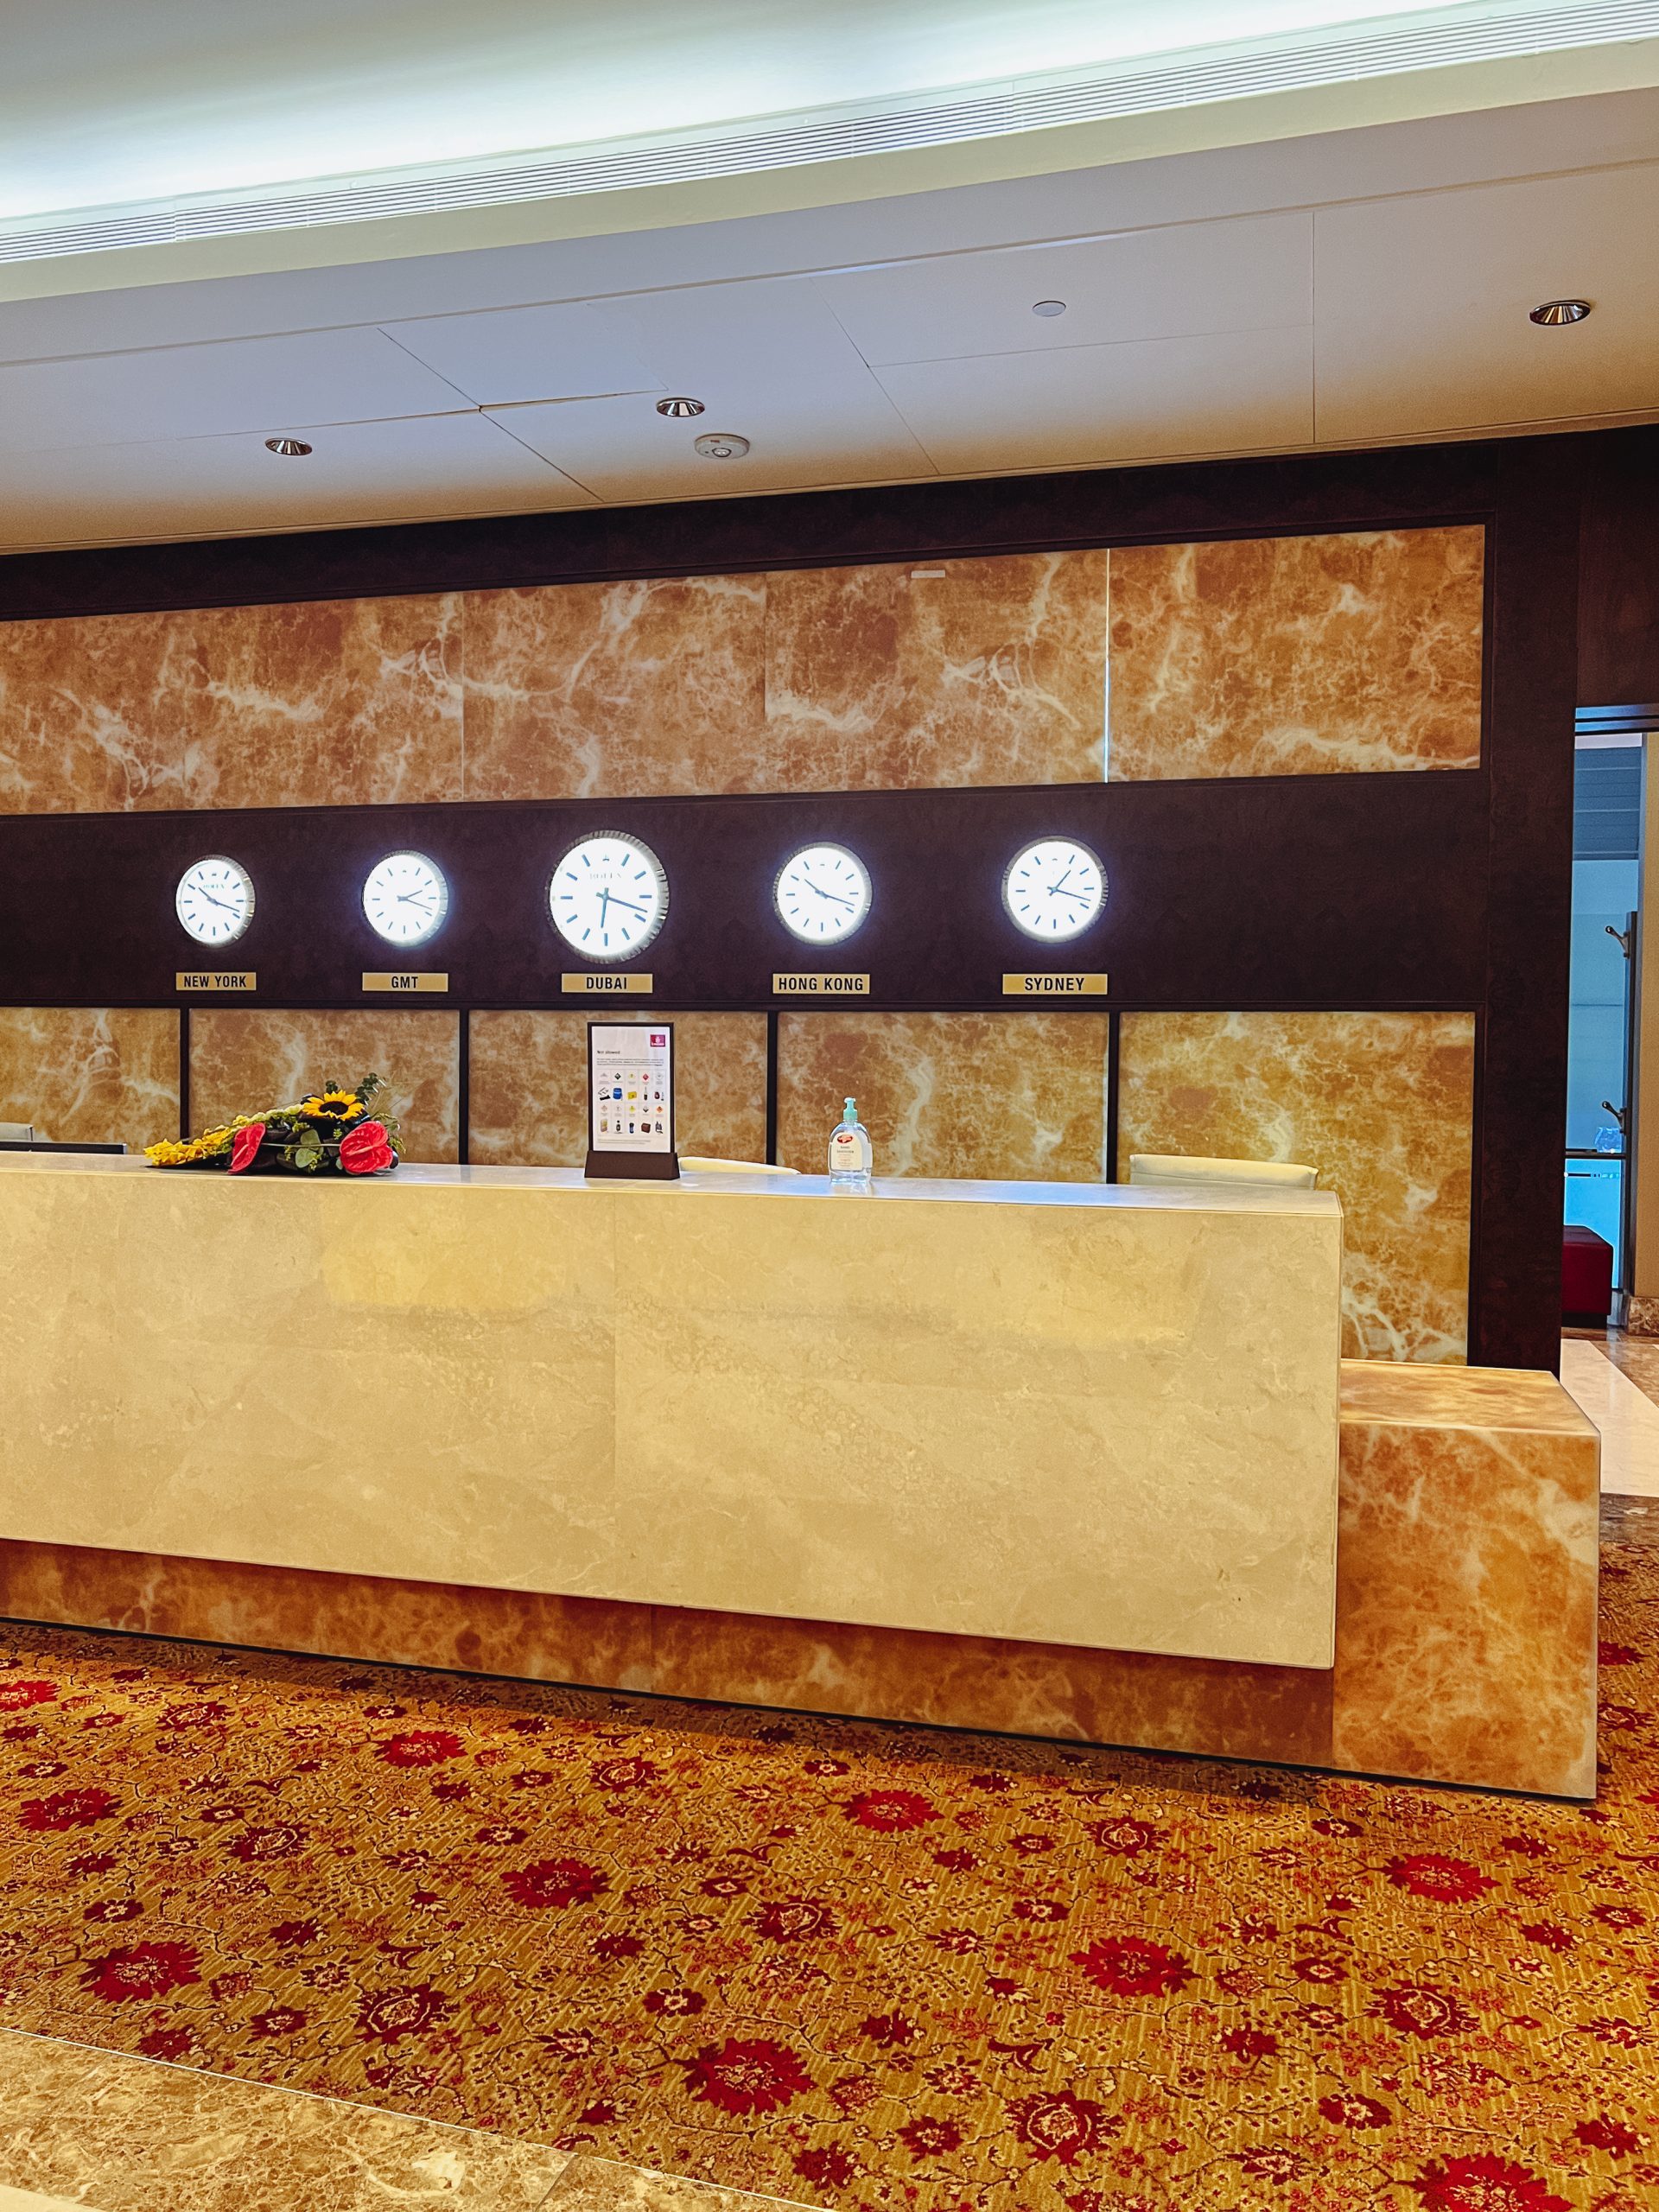 a reception desk with clocks on it